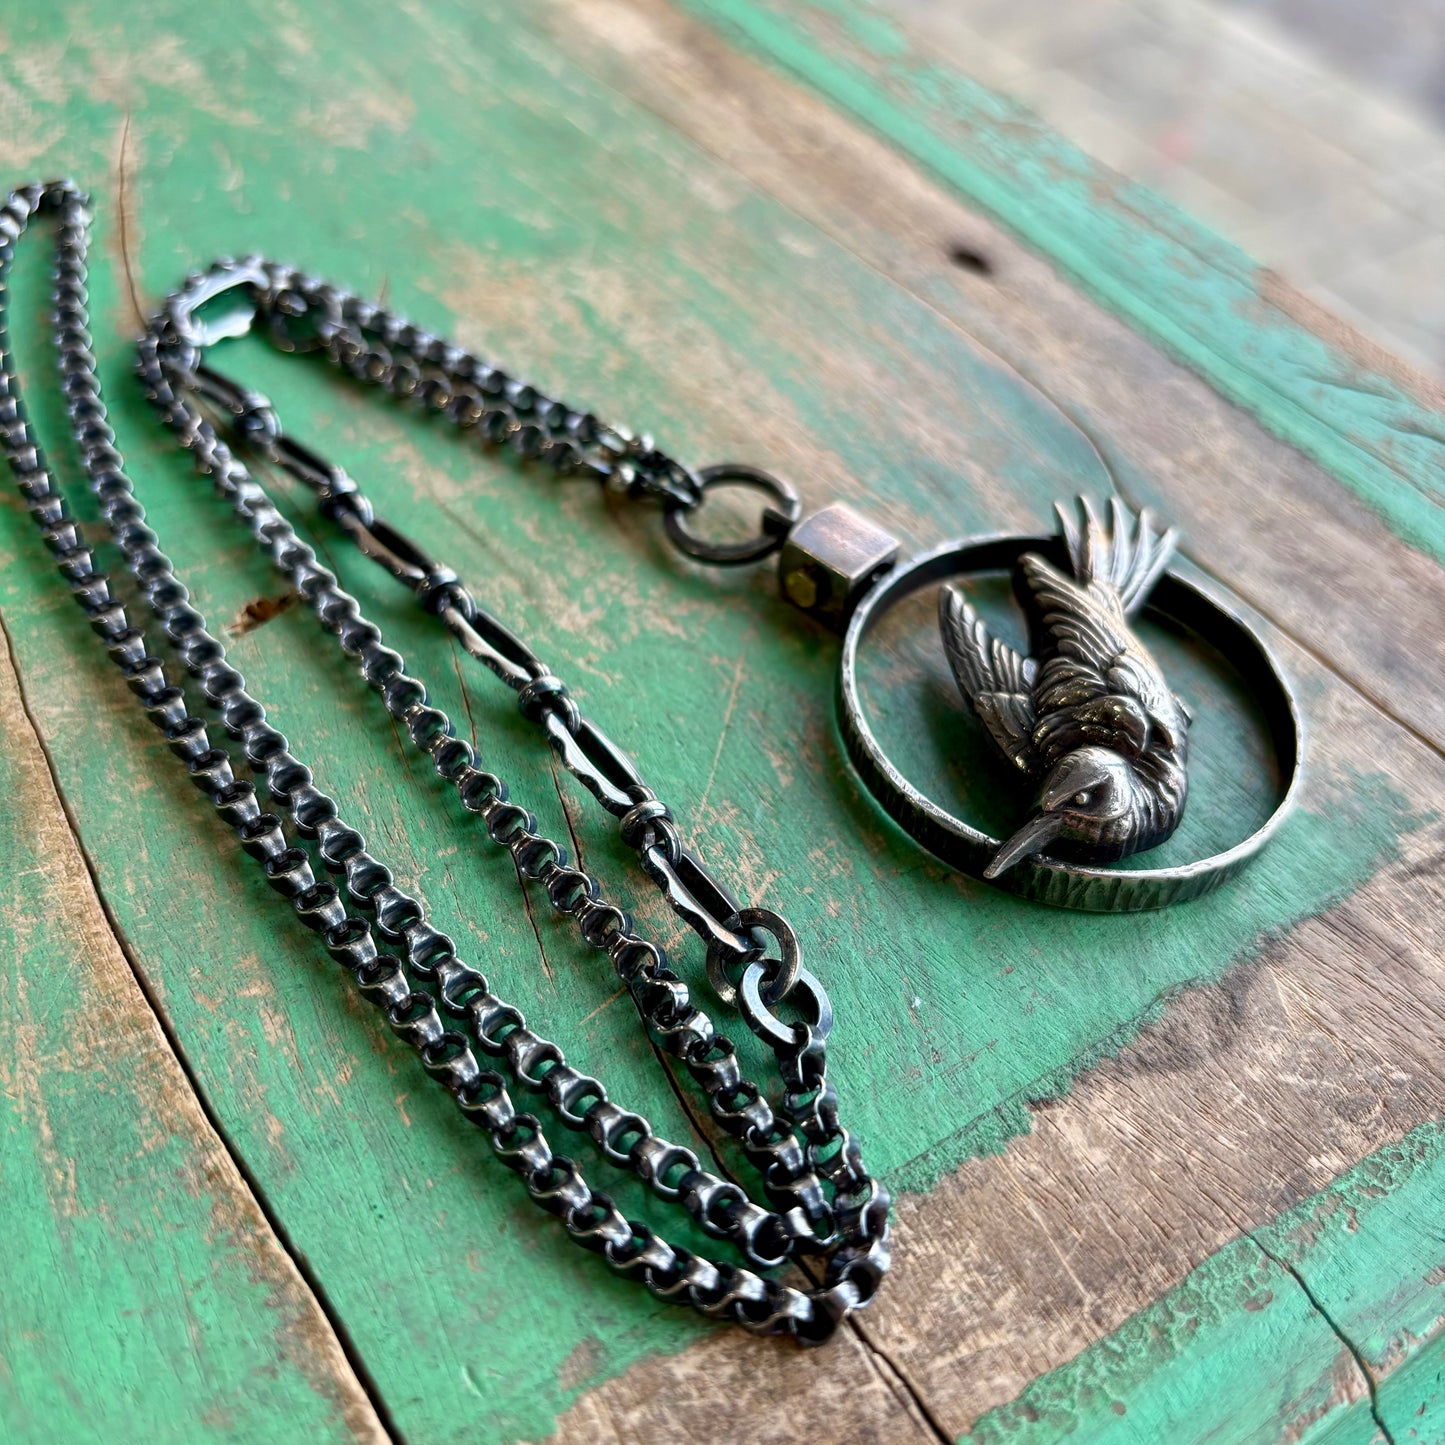 Come, Holy Spirit Necklace